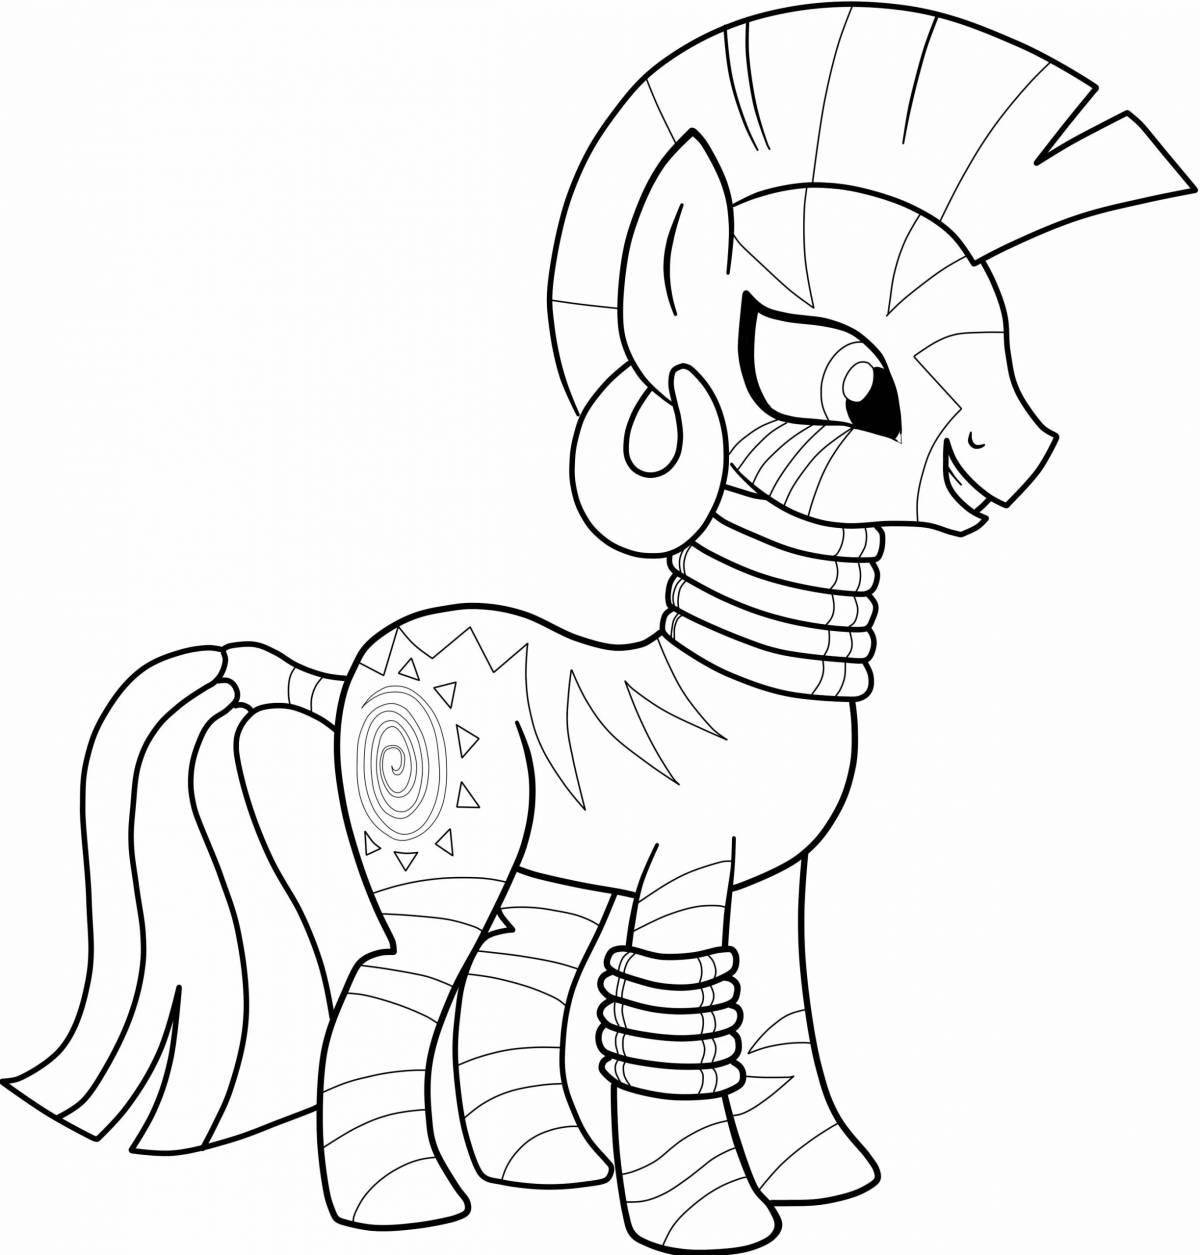 Adorable pony drawing coloring book